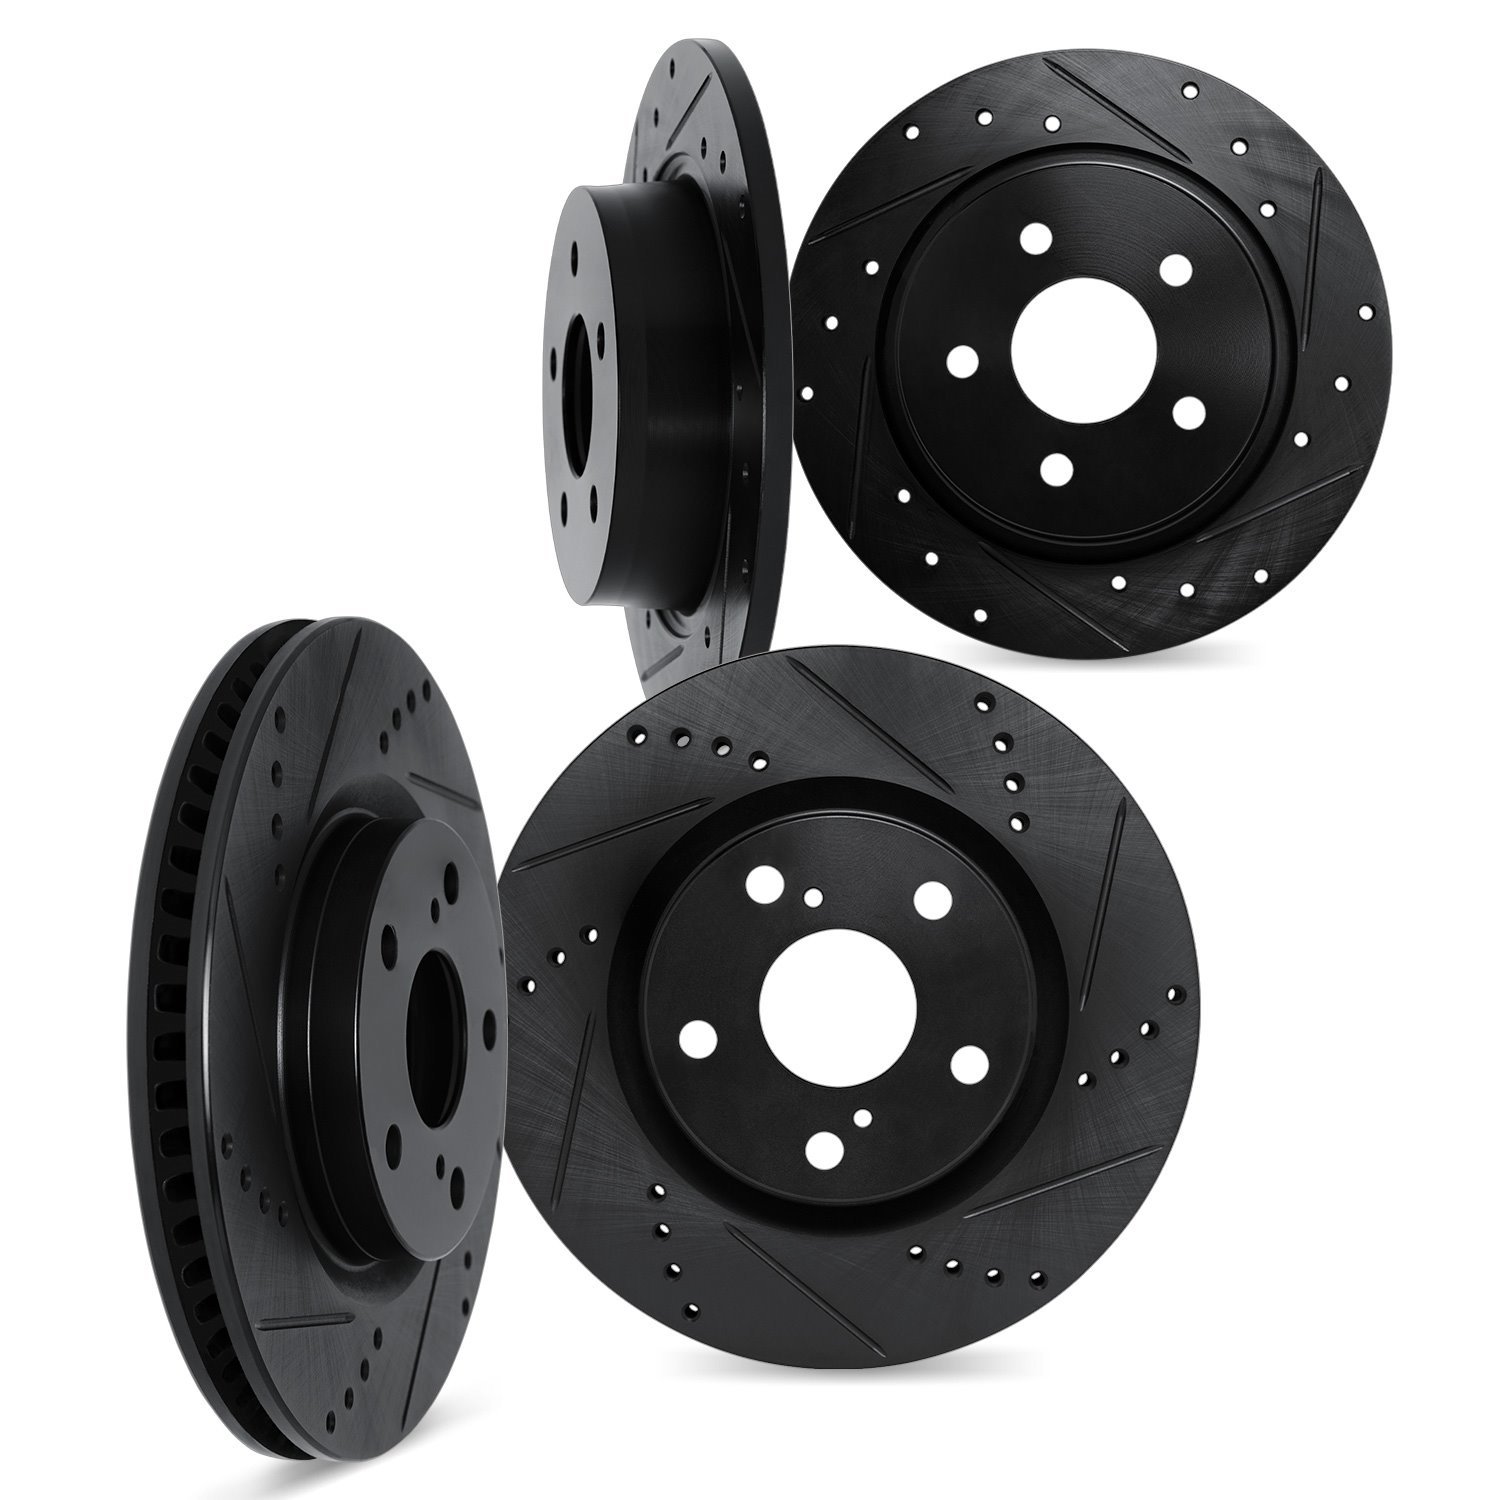 8004-58025 Drilled/Slotted Brake Rotors [Black], 2004-2008 Acura/Honda, Position: Front and Rear